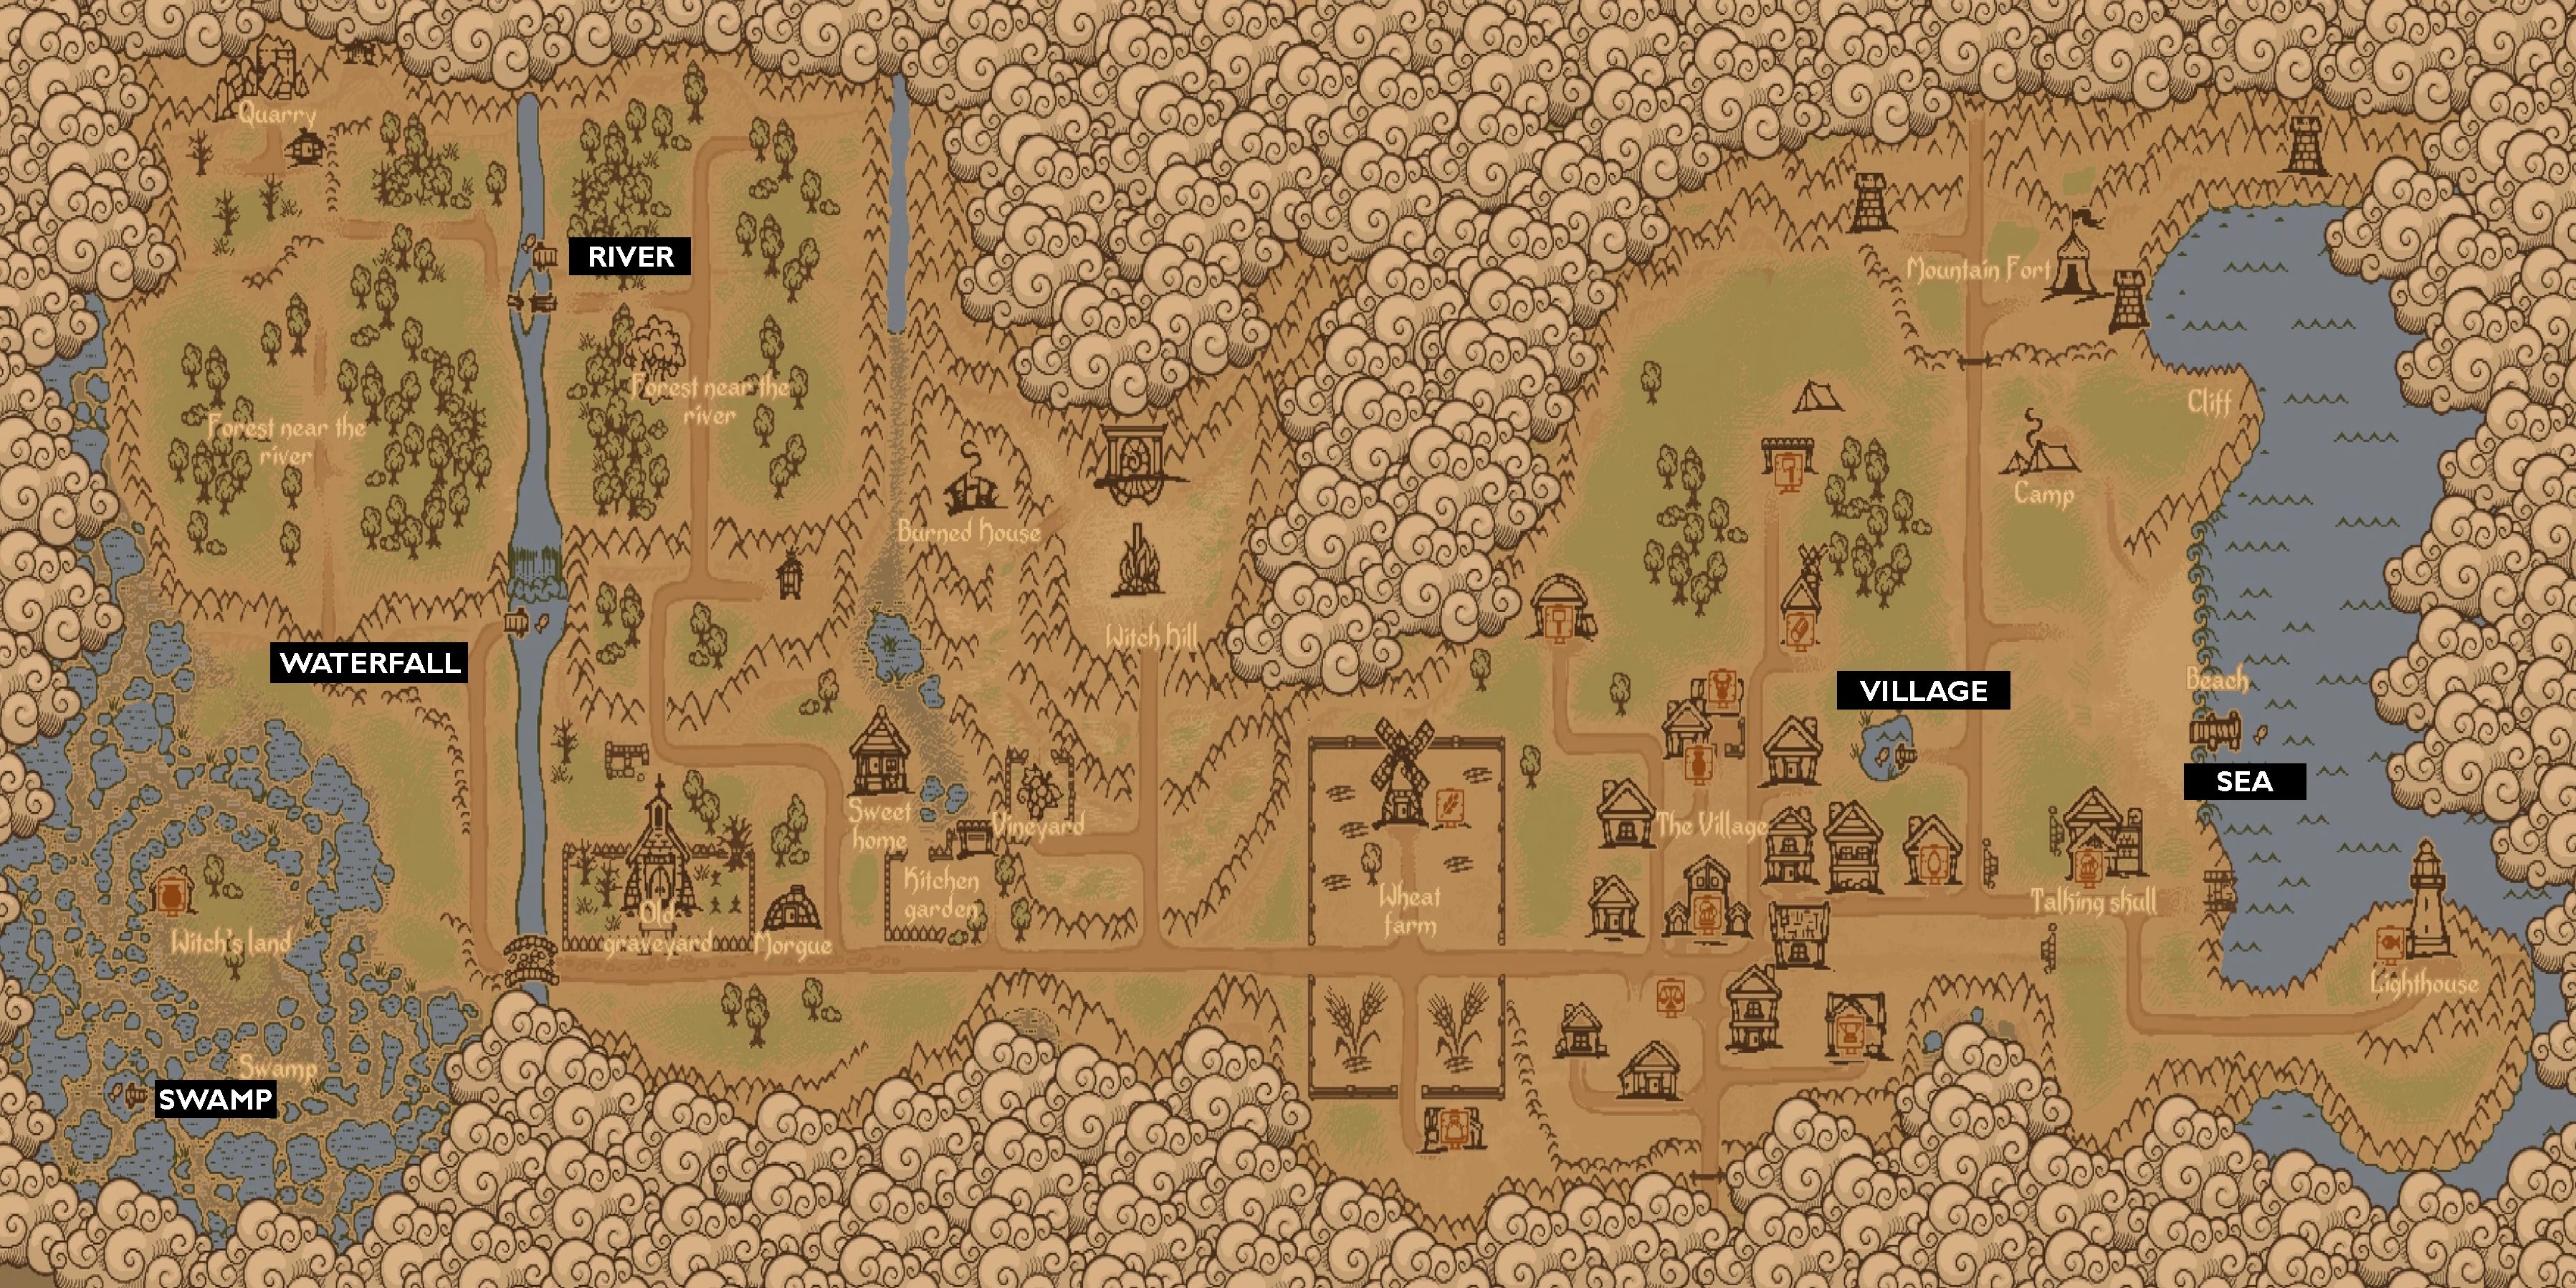 Graveyard Keeper full map with annotated fishing spots